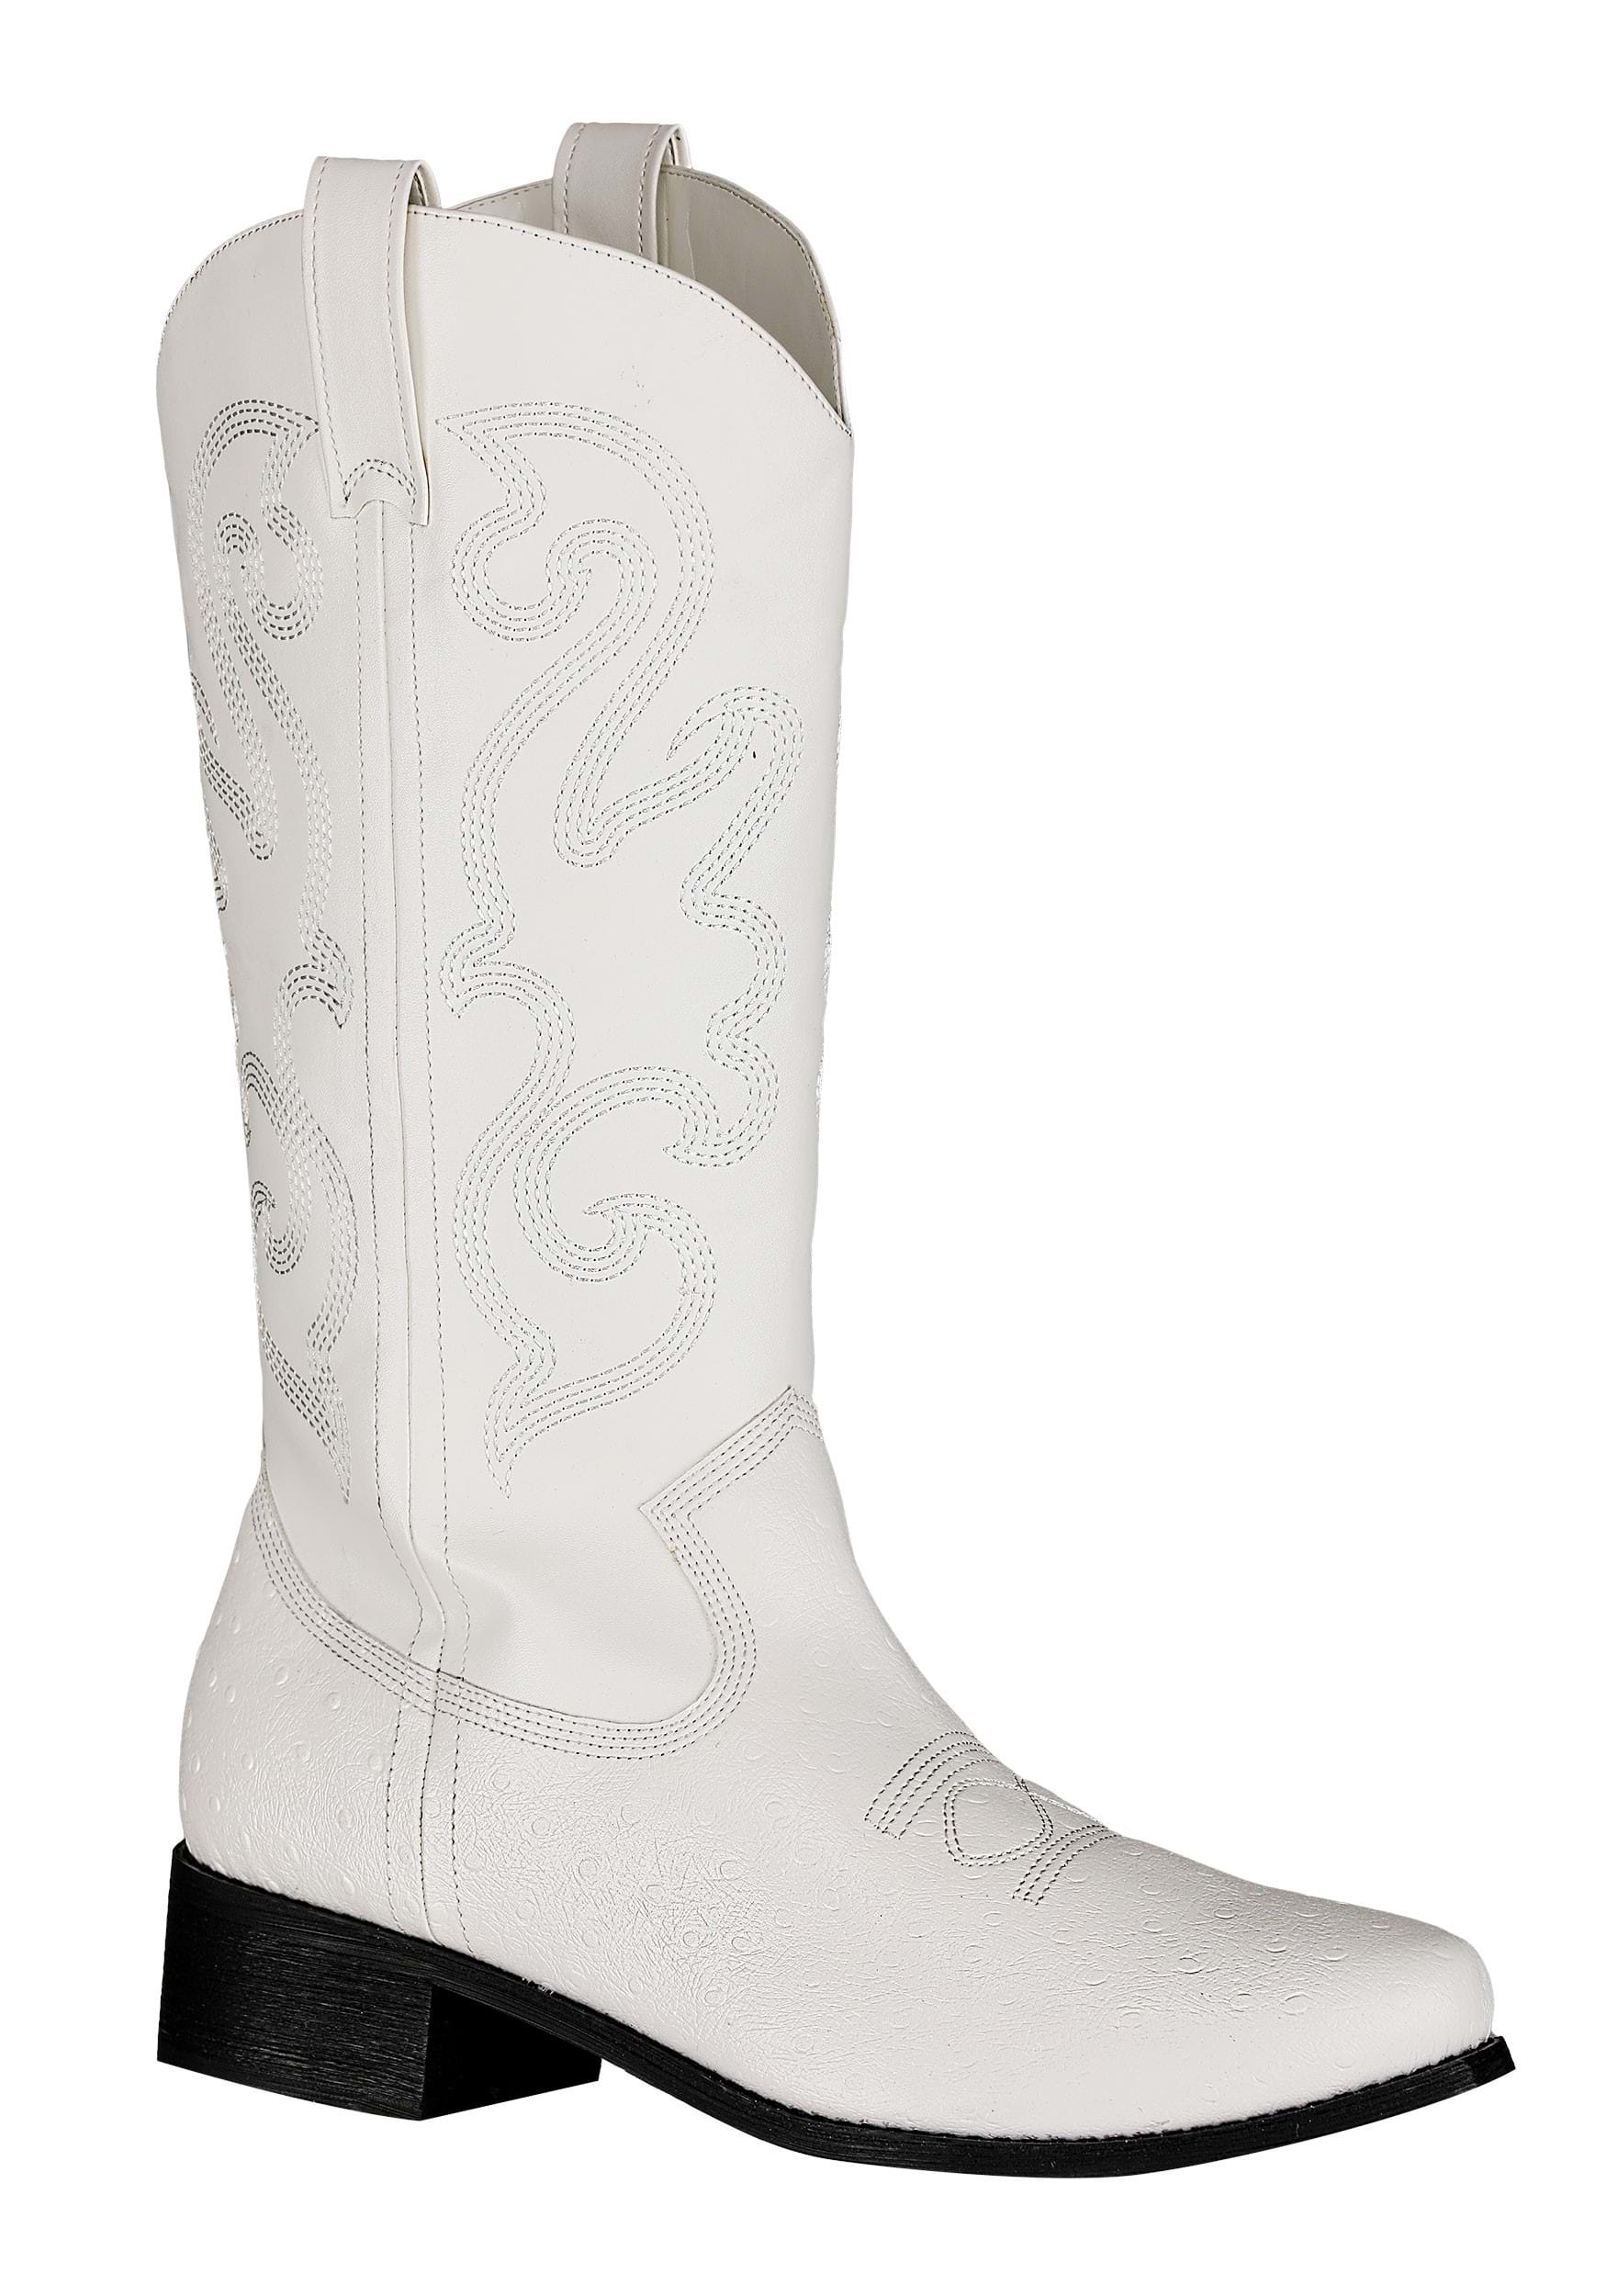 Mens White Cowboy Boots | Adult Costume Shoes